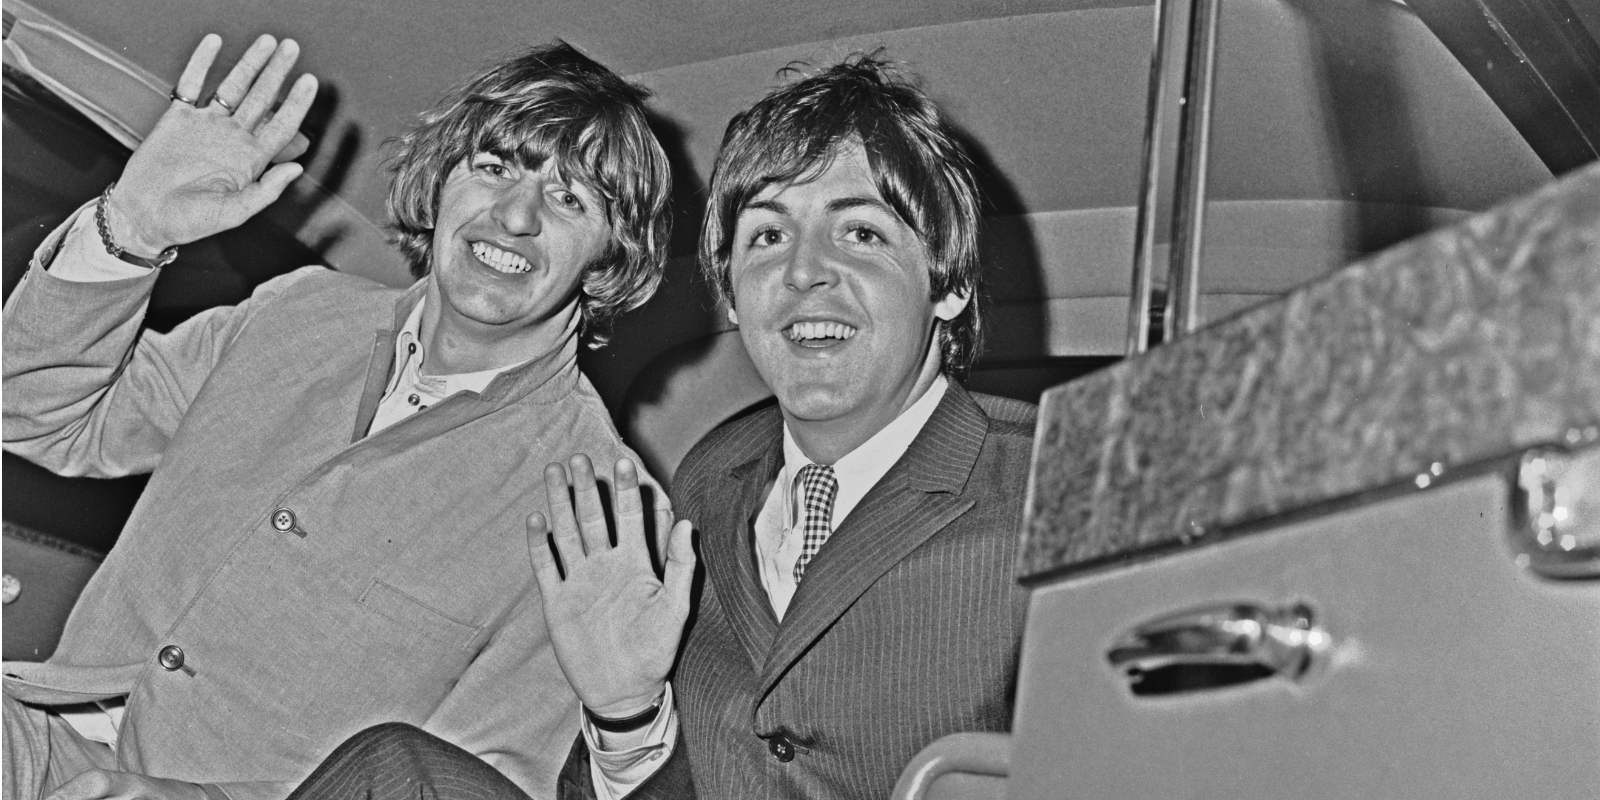 Ringo Starr (left) and Paul McCartney of English pop group the Beatles at London Airport (later Heathrow), UK, 2nd September 1965. They are returning from their tour of the US. 